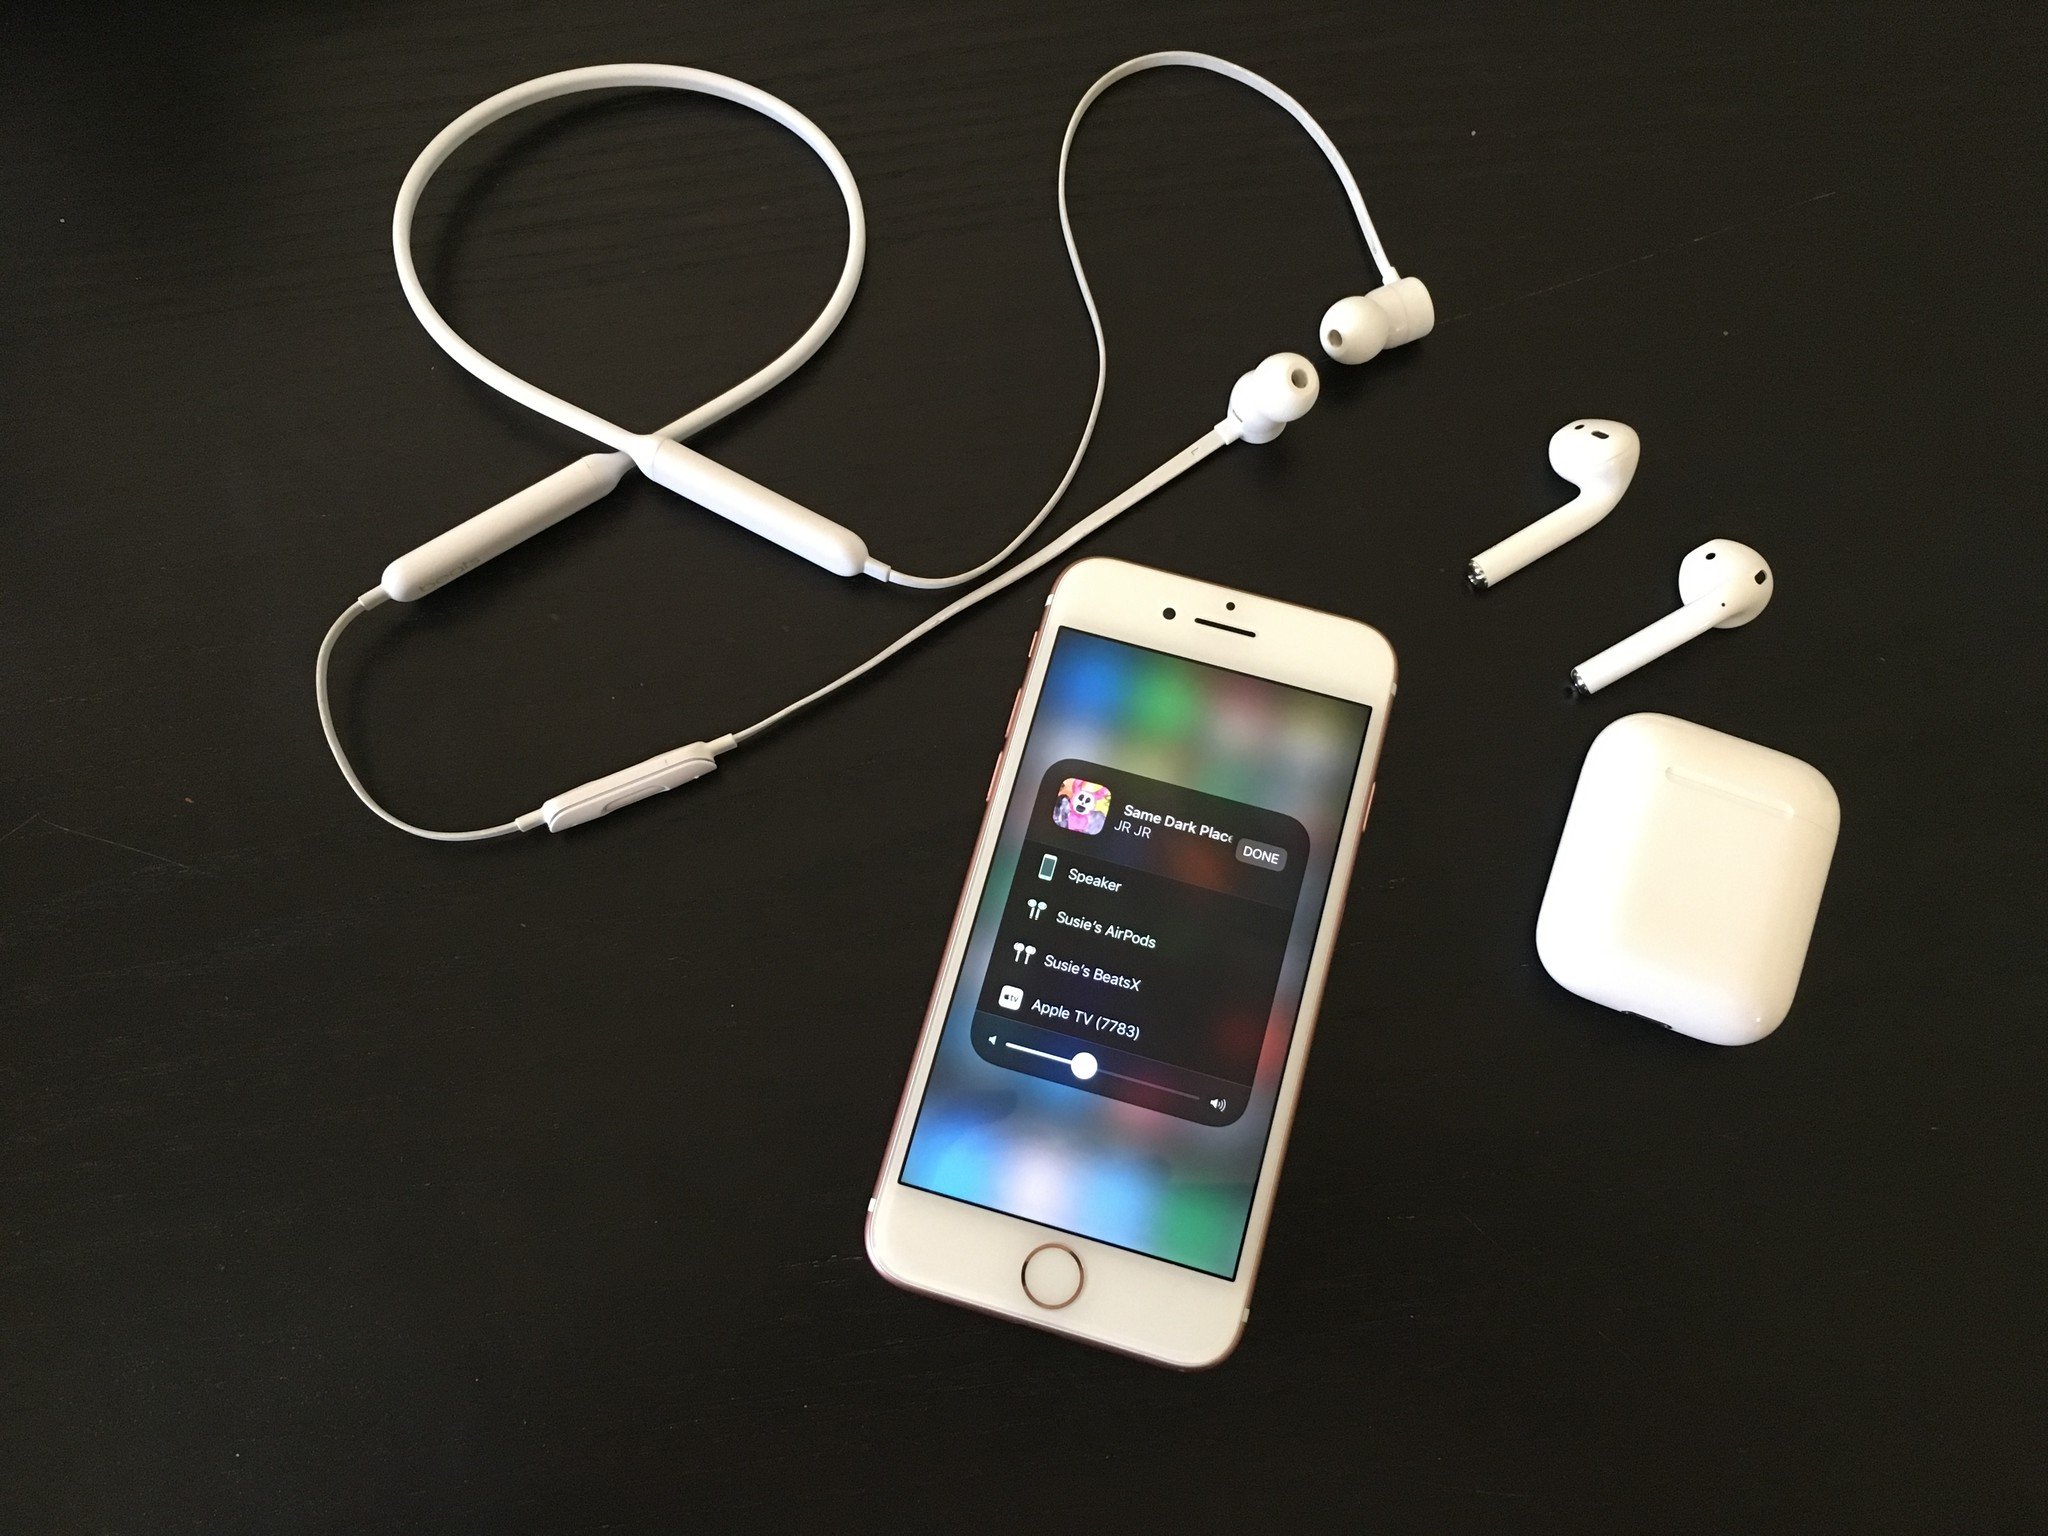 iPhone, BeatsX, AirPods, shown with iOS 11's new Control Center audio controls